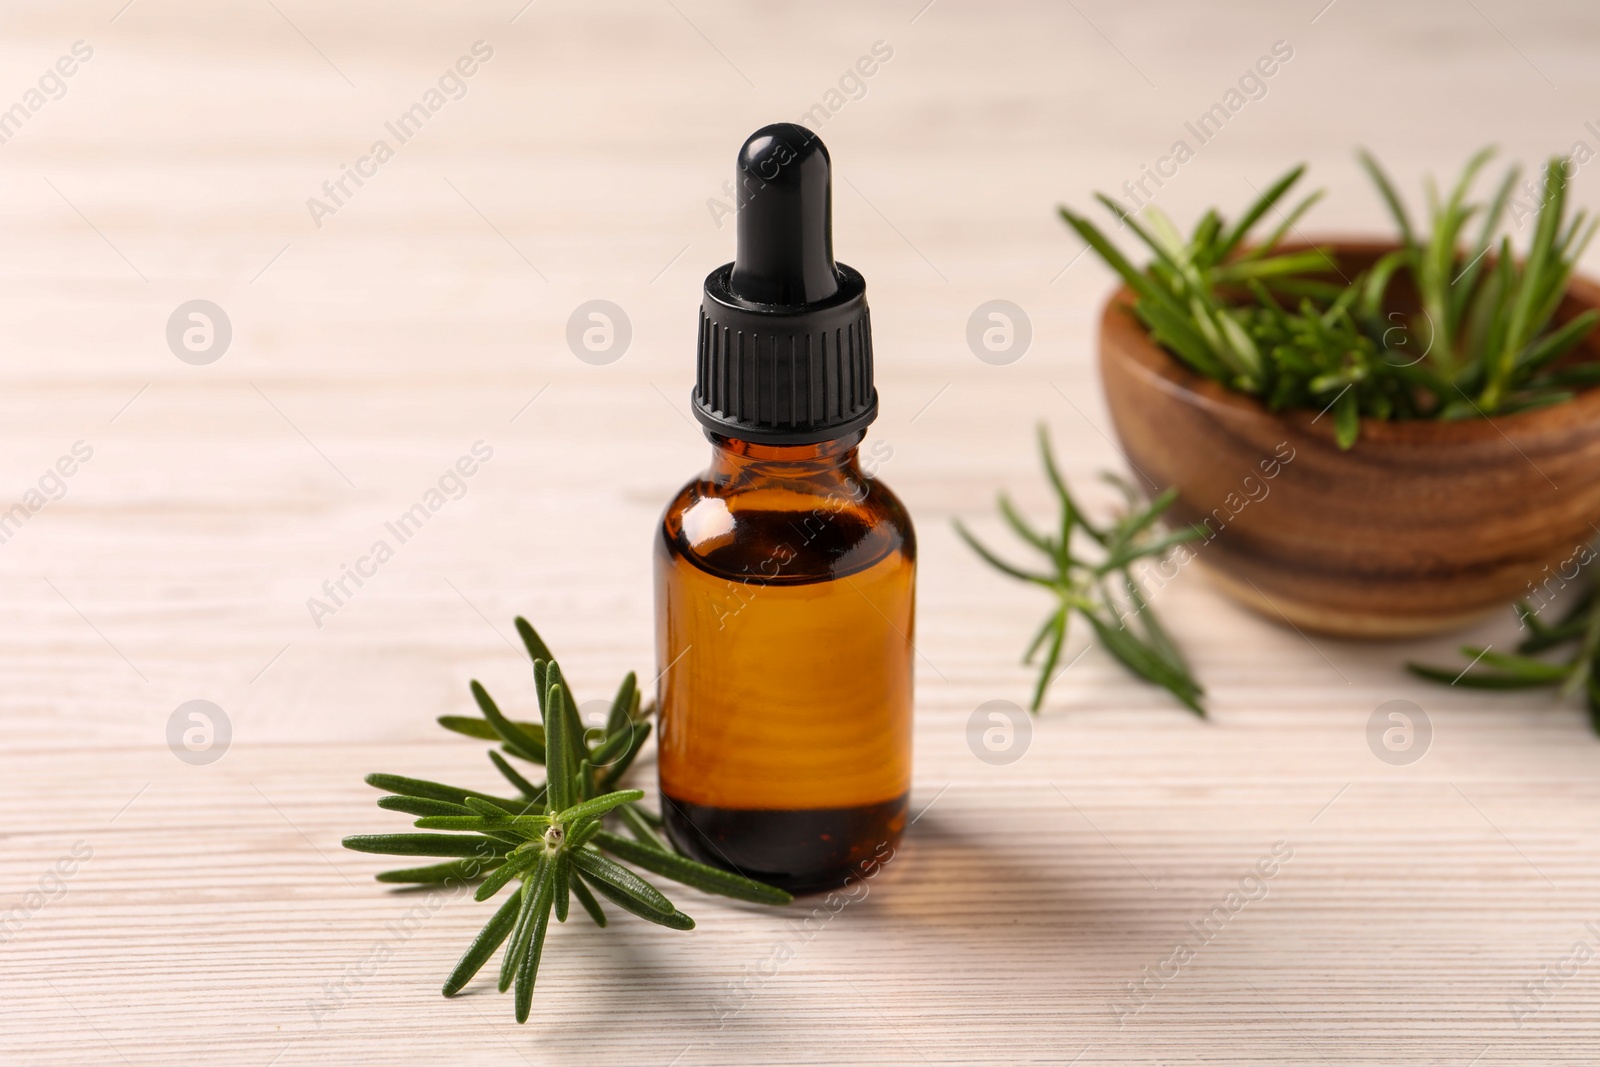 Photo of Bottle with essential oil and fresh rosemary on white wooden table